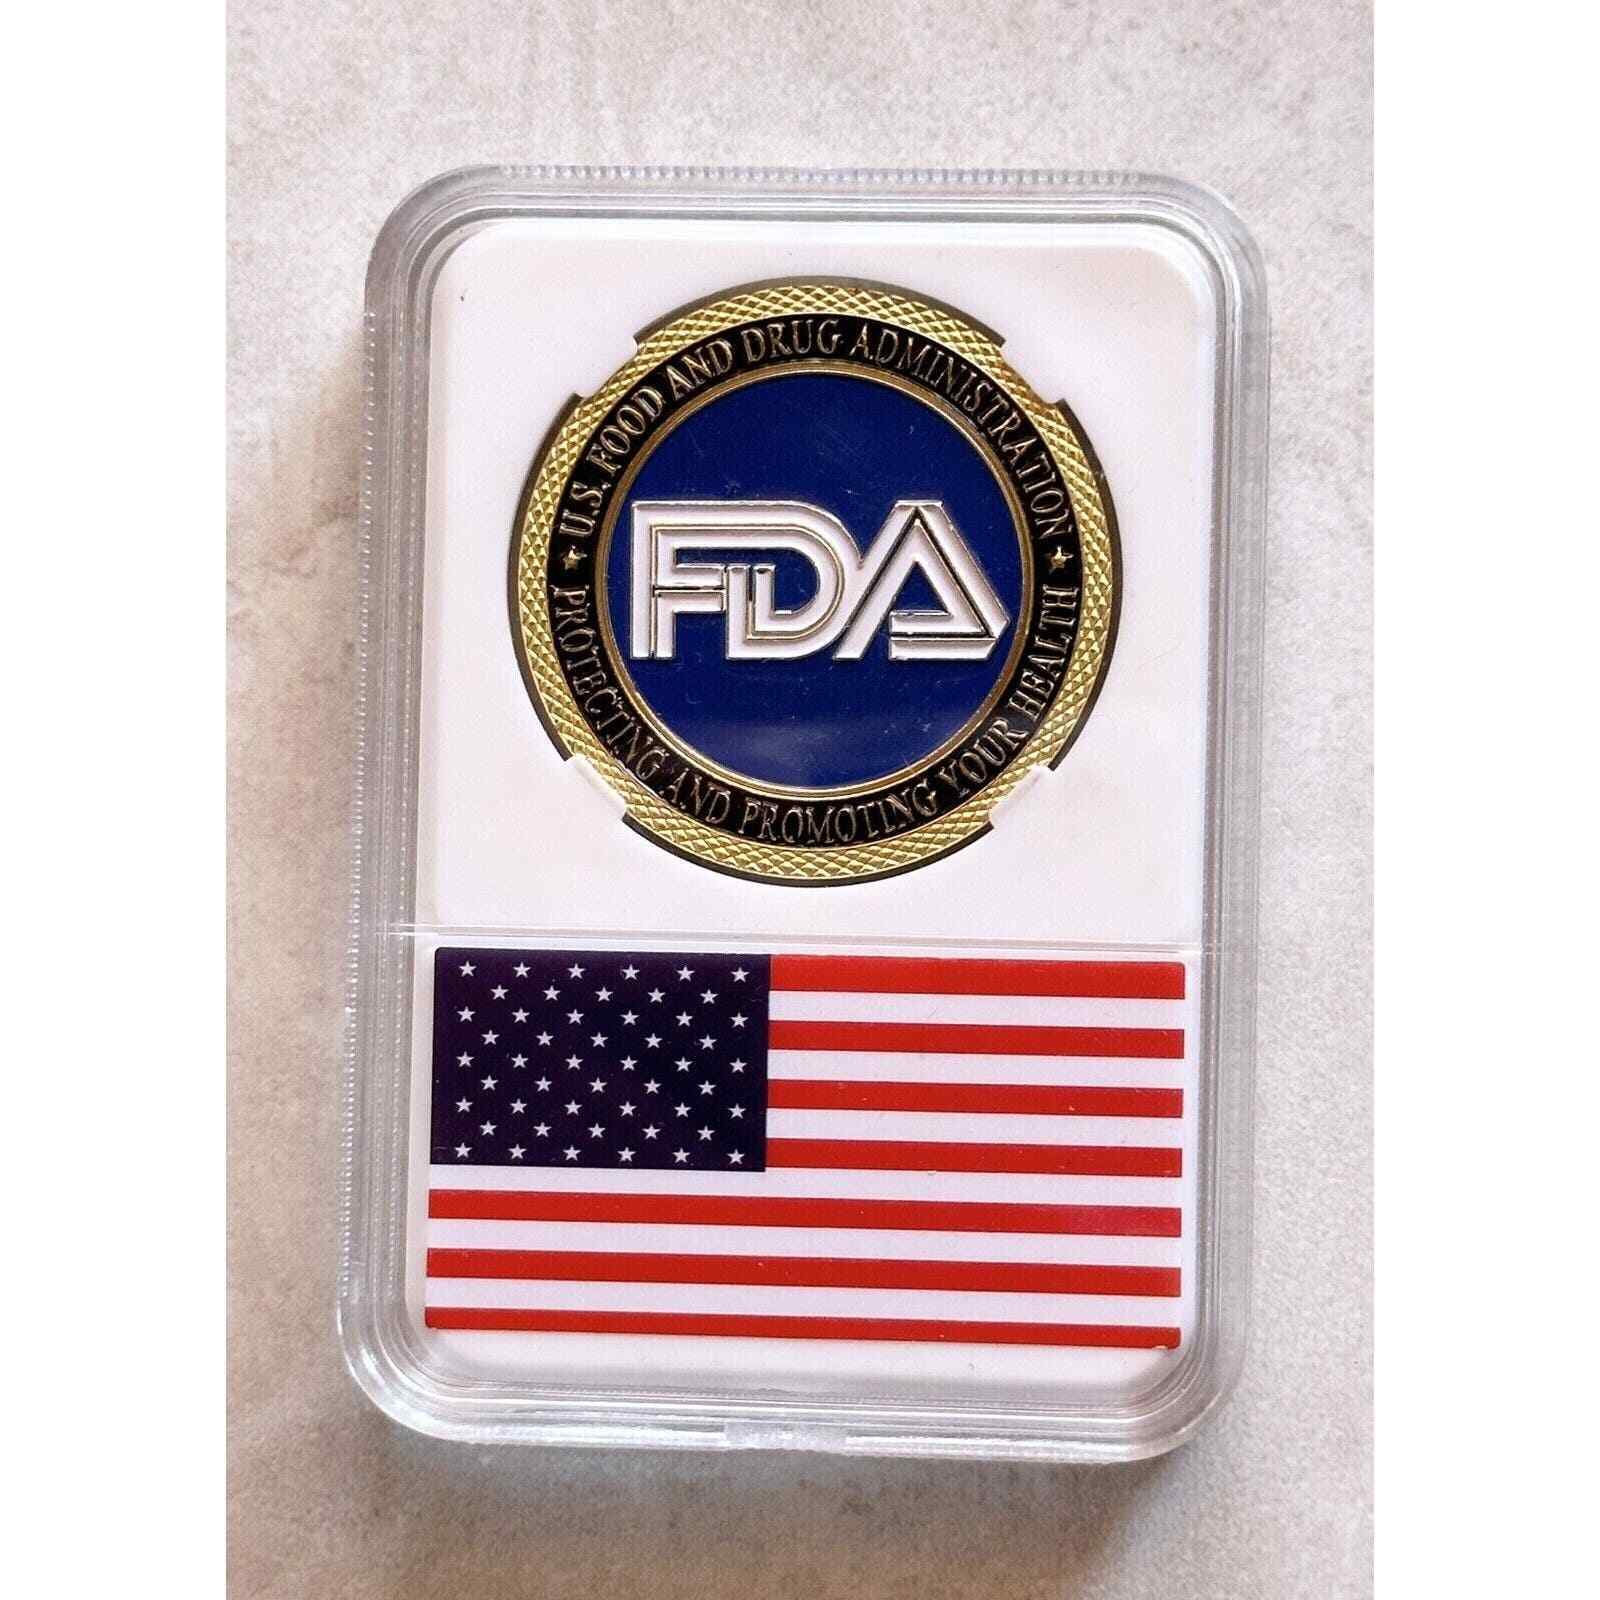 FDA US Food & Drug Administration Challenge Coin with American Flag Case